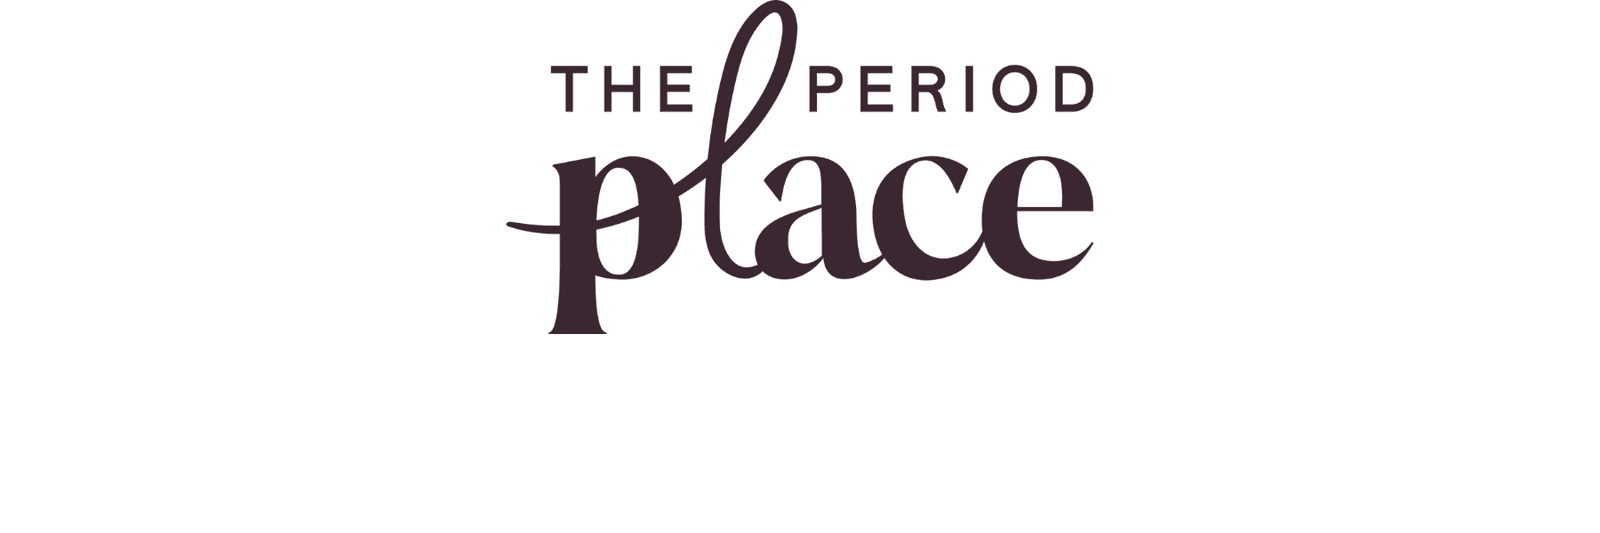 The Period Place